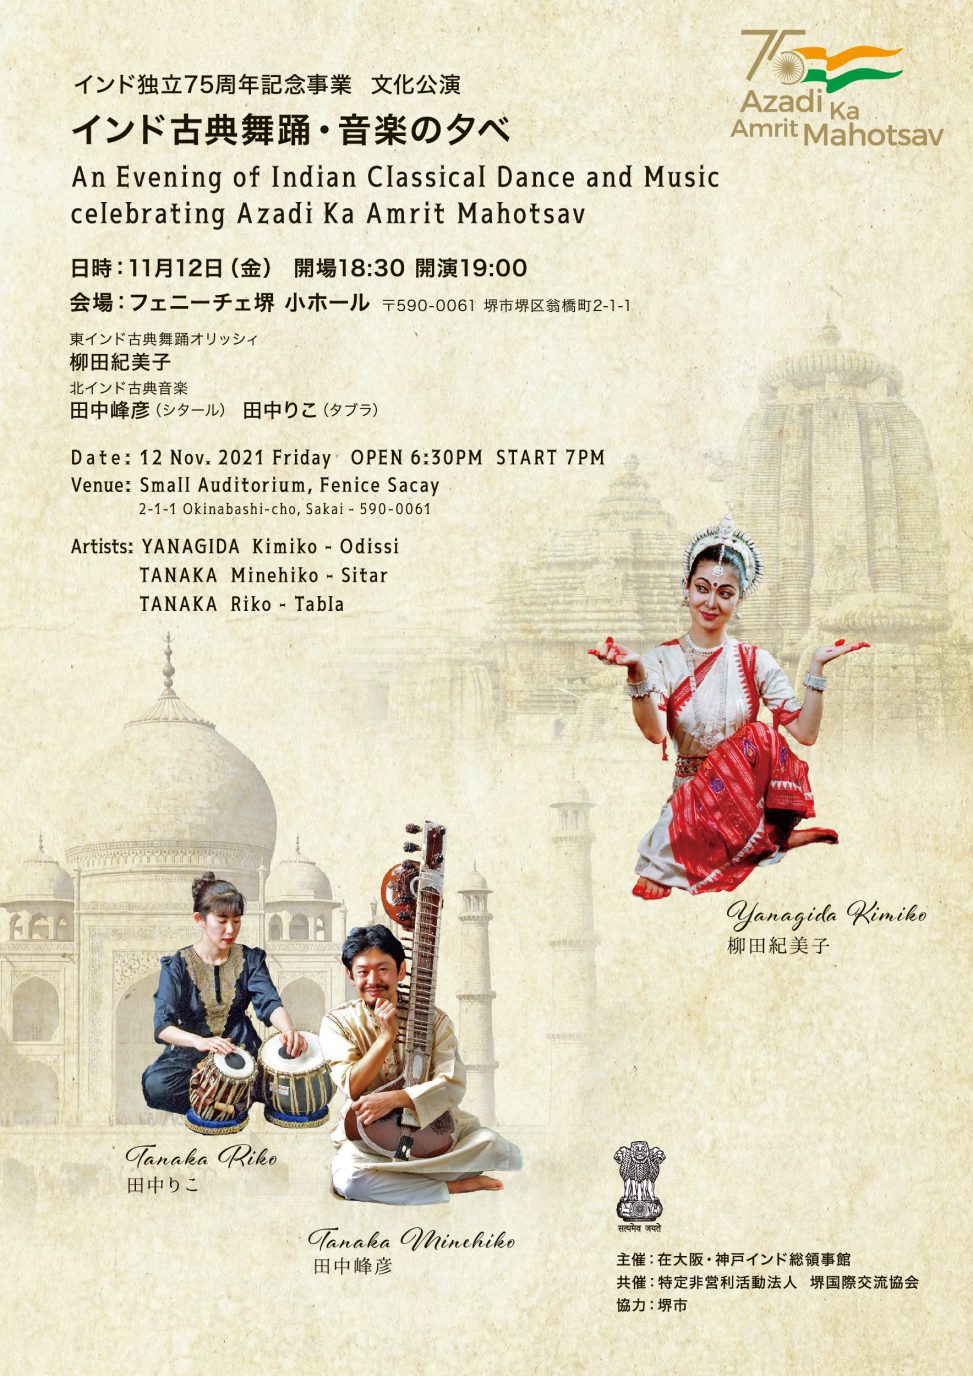 An Evening of Indian Classical Dance and Music